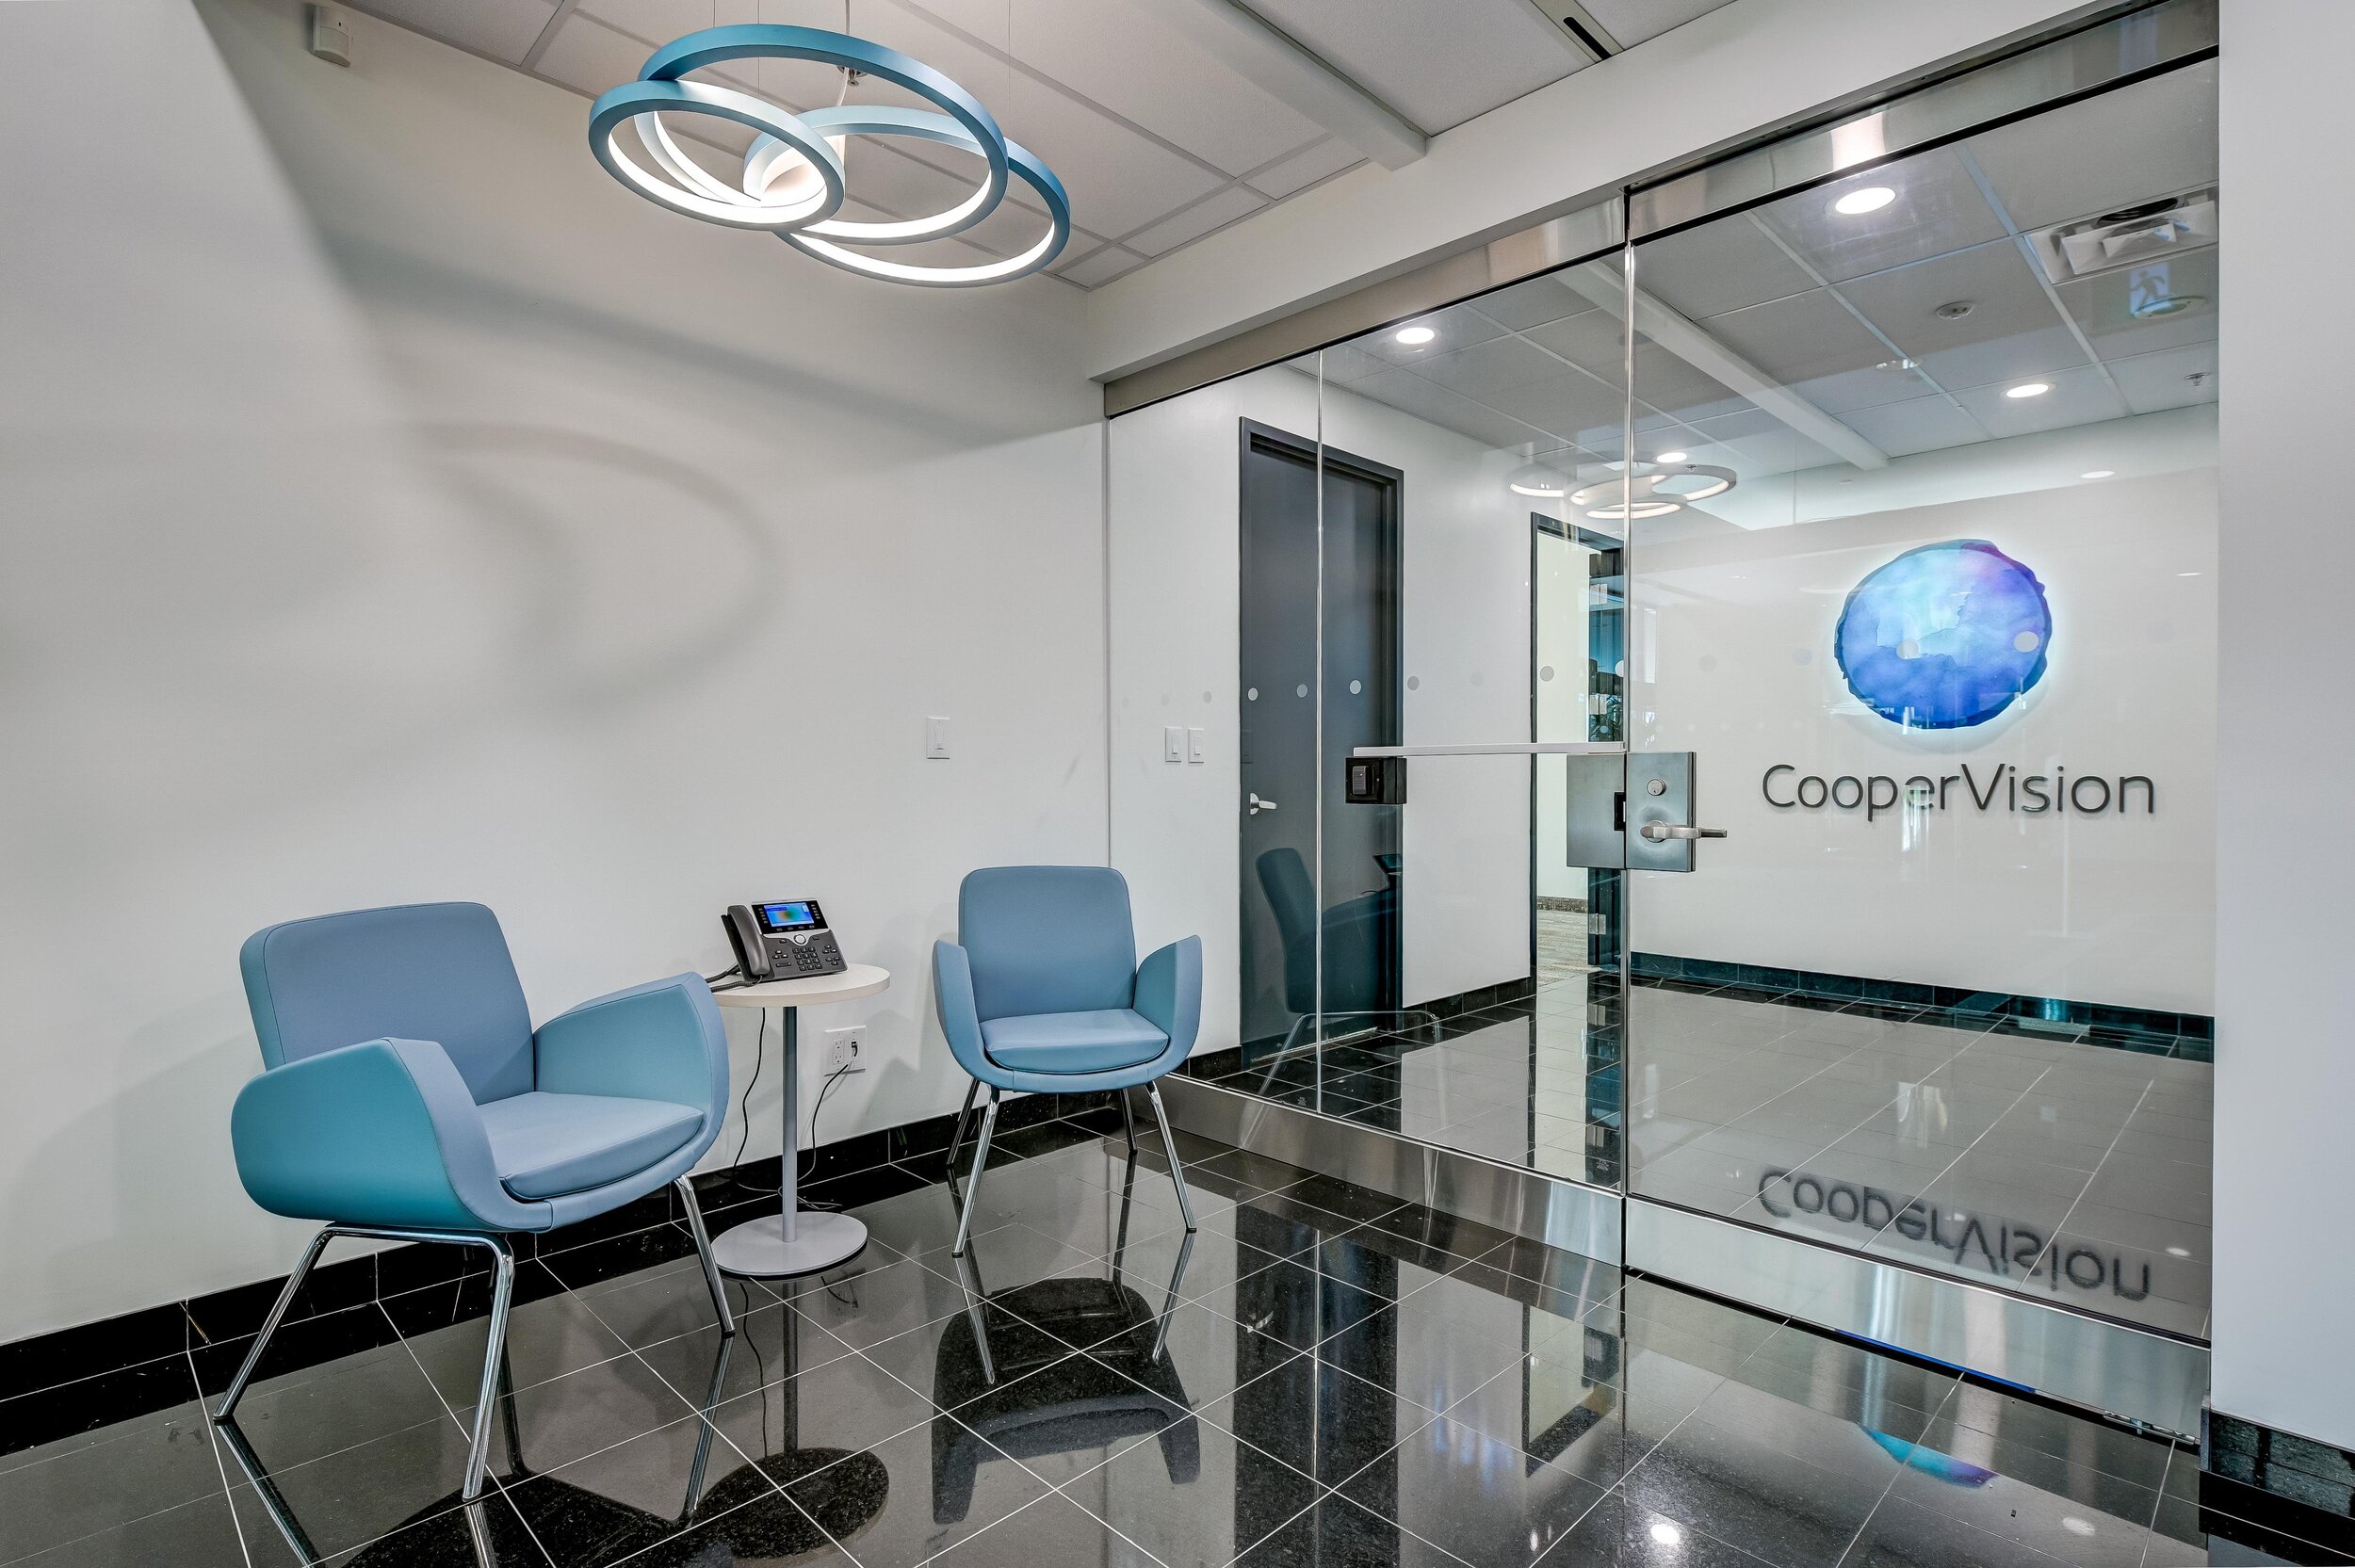 coopervision canada lobby and reception design